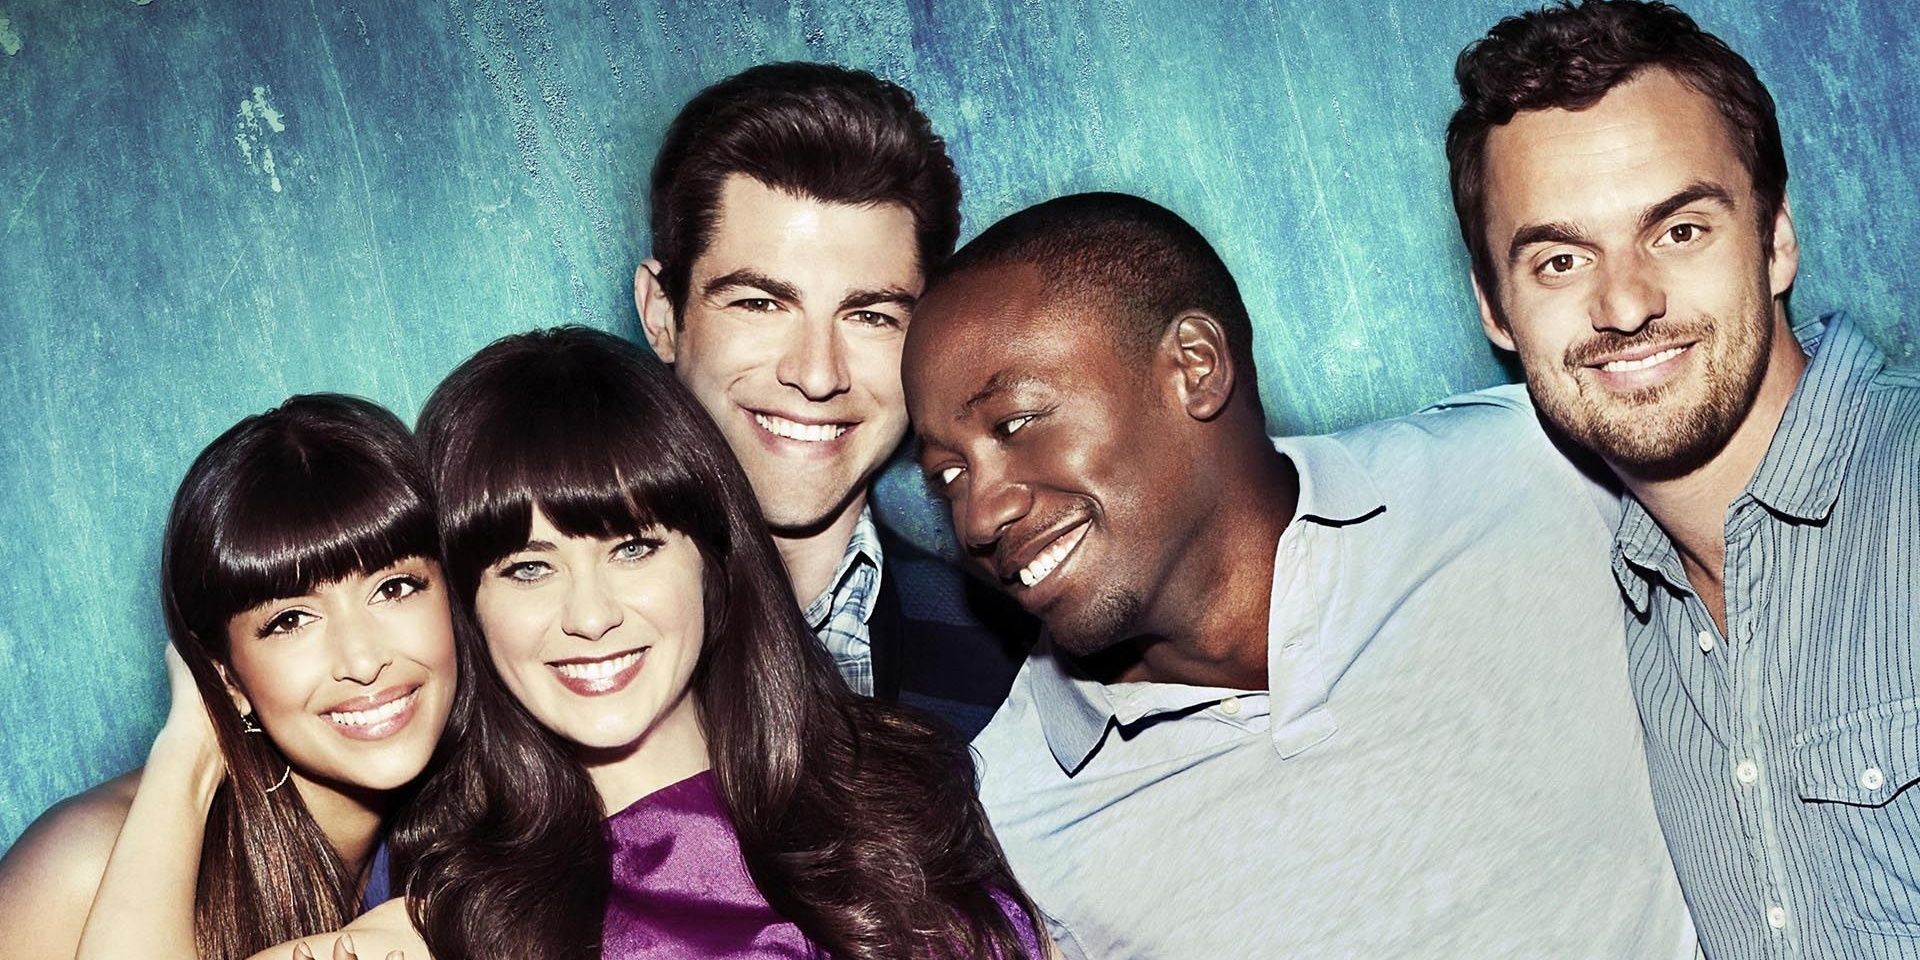 New Girl 5 Couples That Are Perfect Together (& 5 That Make No Sense)